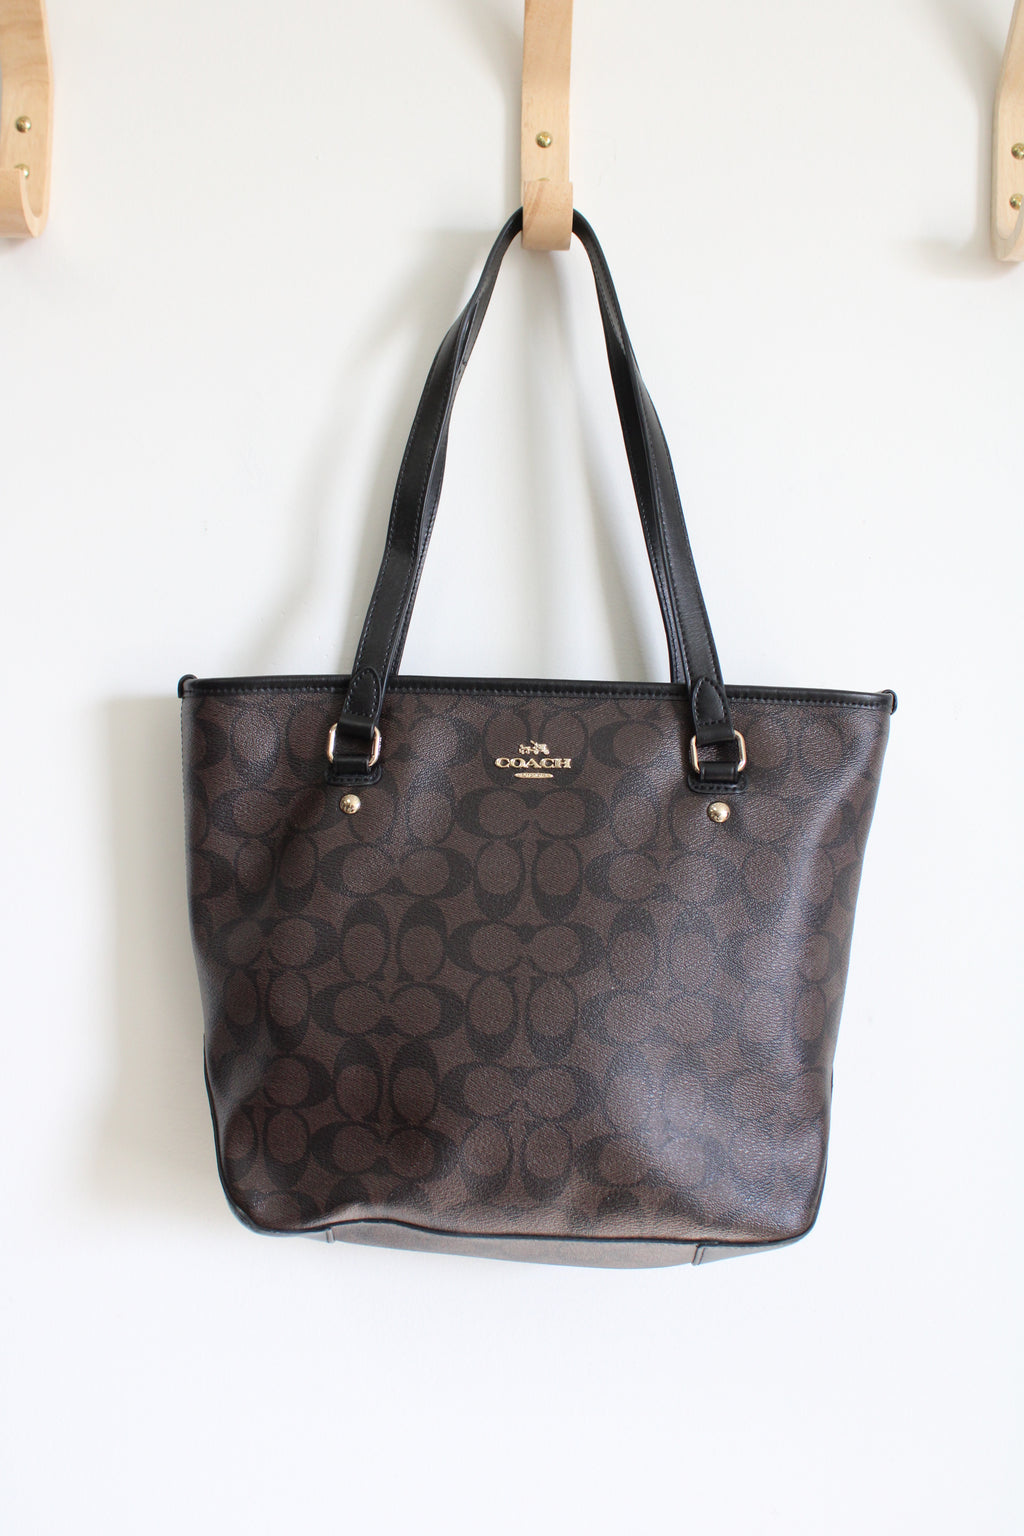 Coach Black & Brown Monogram Zip Top Tote Coated Canvas & Leather Purse